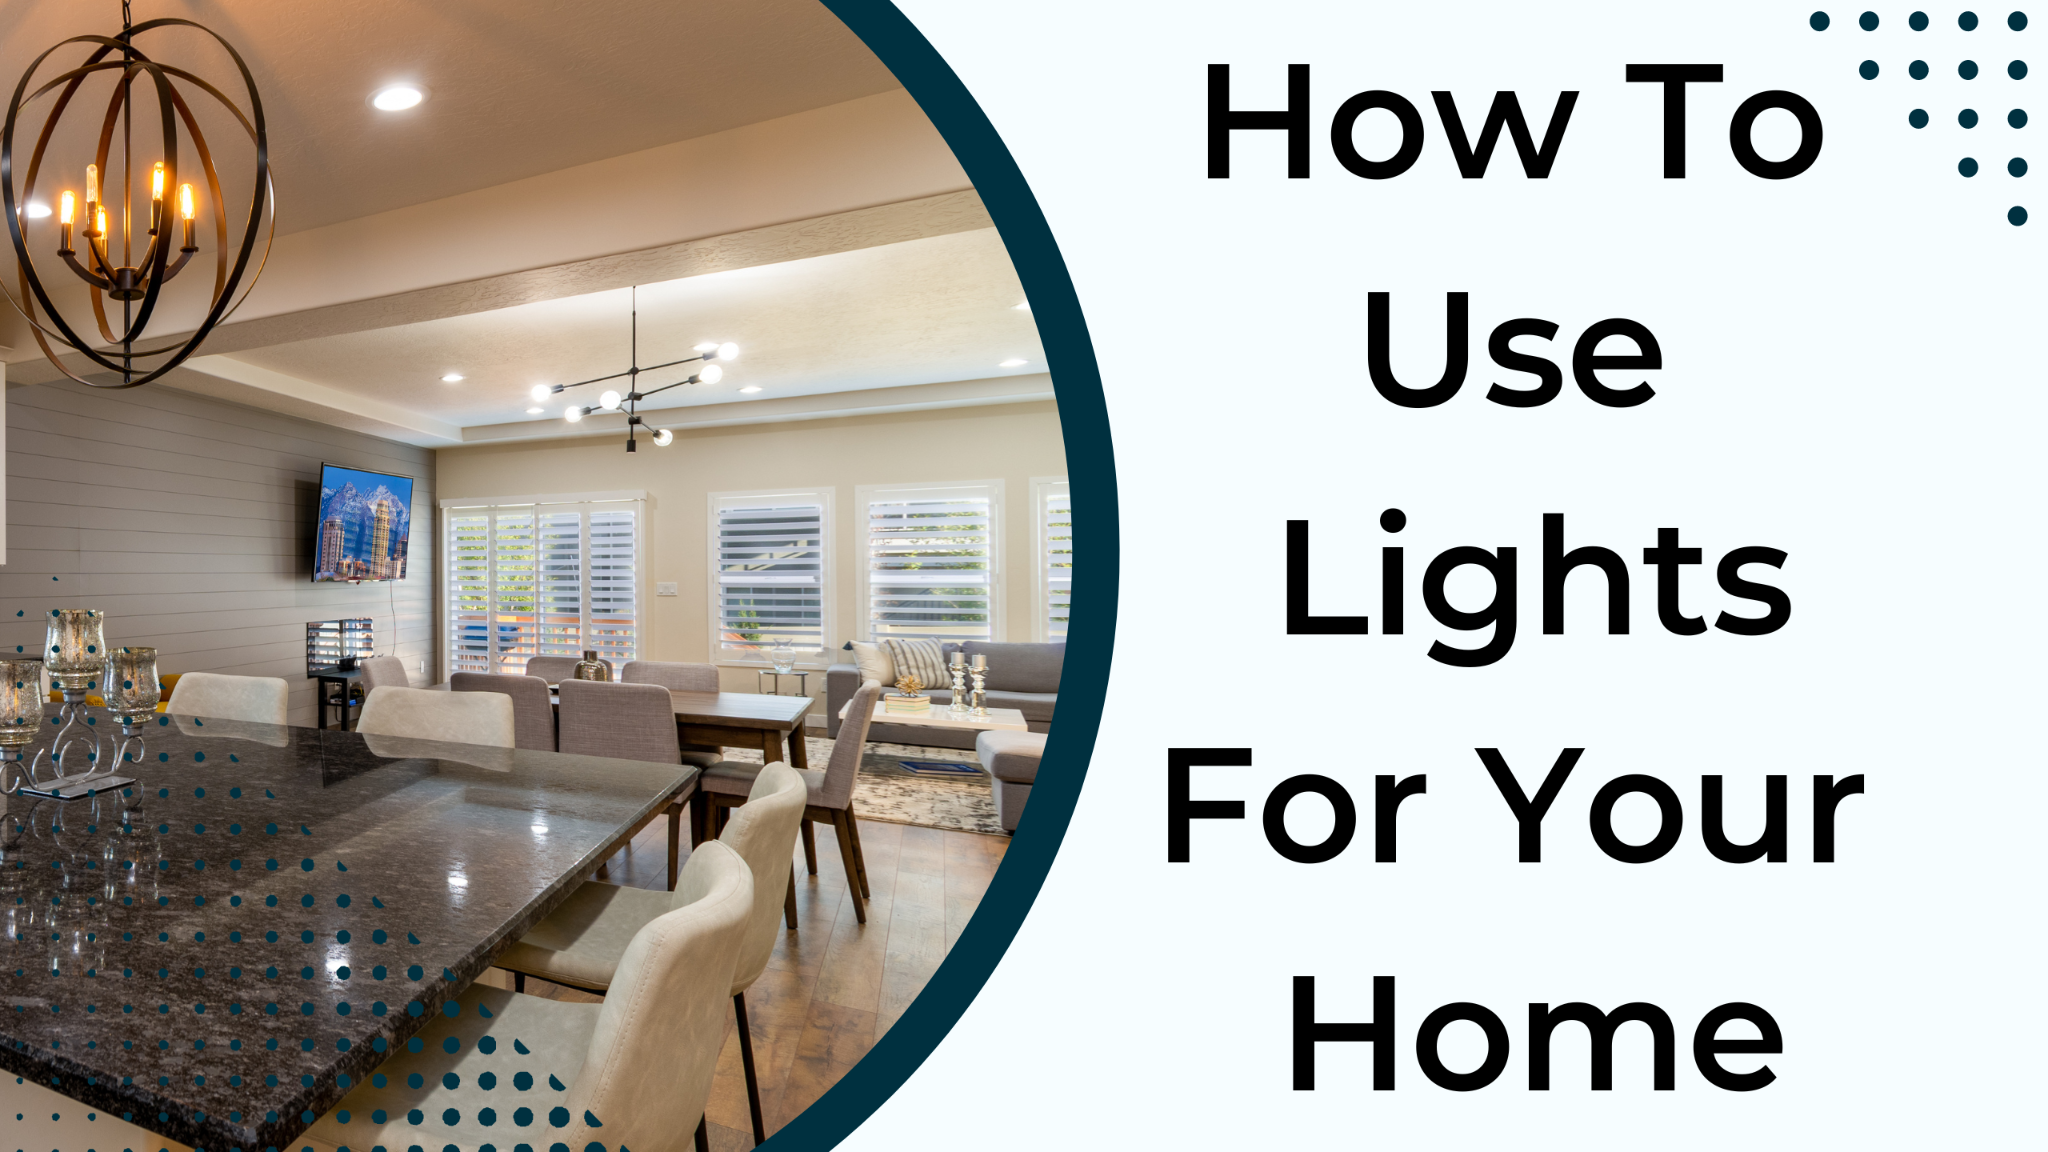 How To Use Lights For Your Home